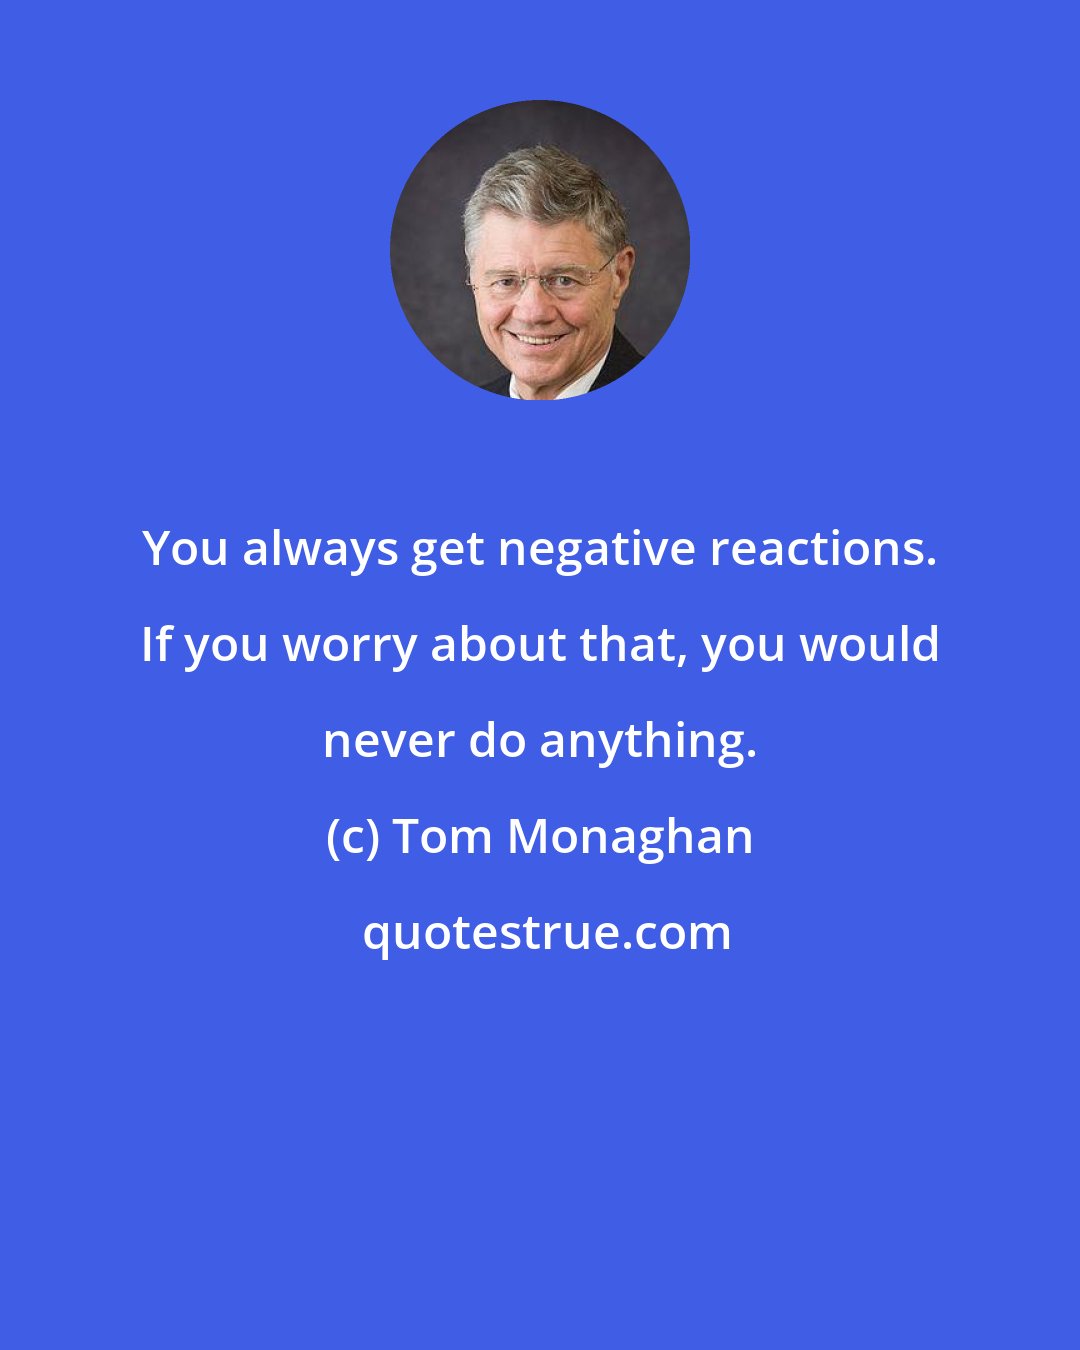 Tom Monaghan: You always get negative reactions. If you worry about that, you would never do anything.